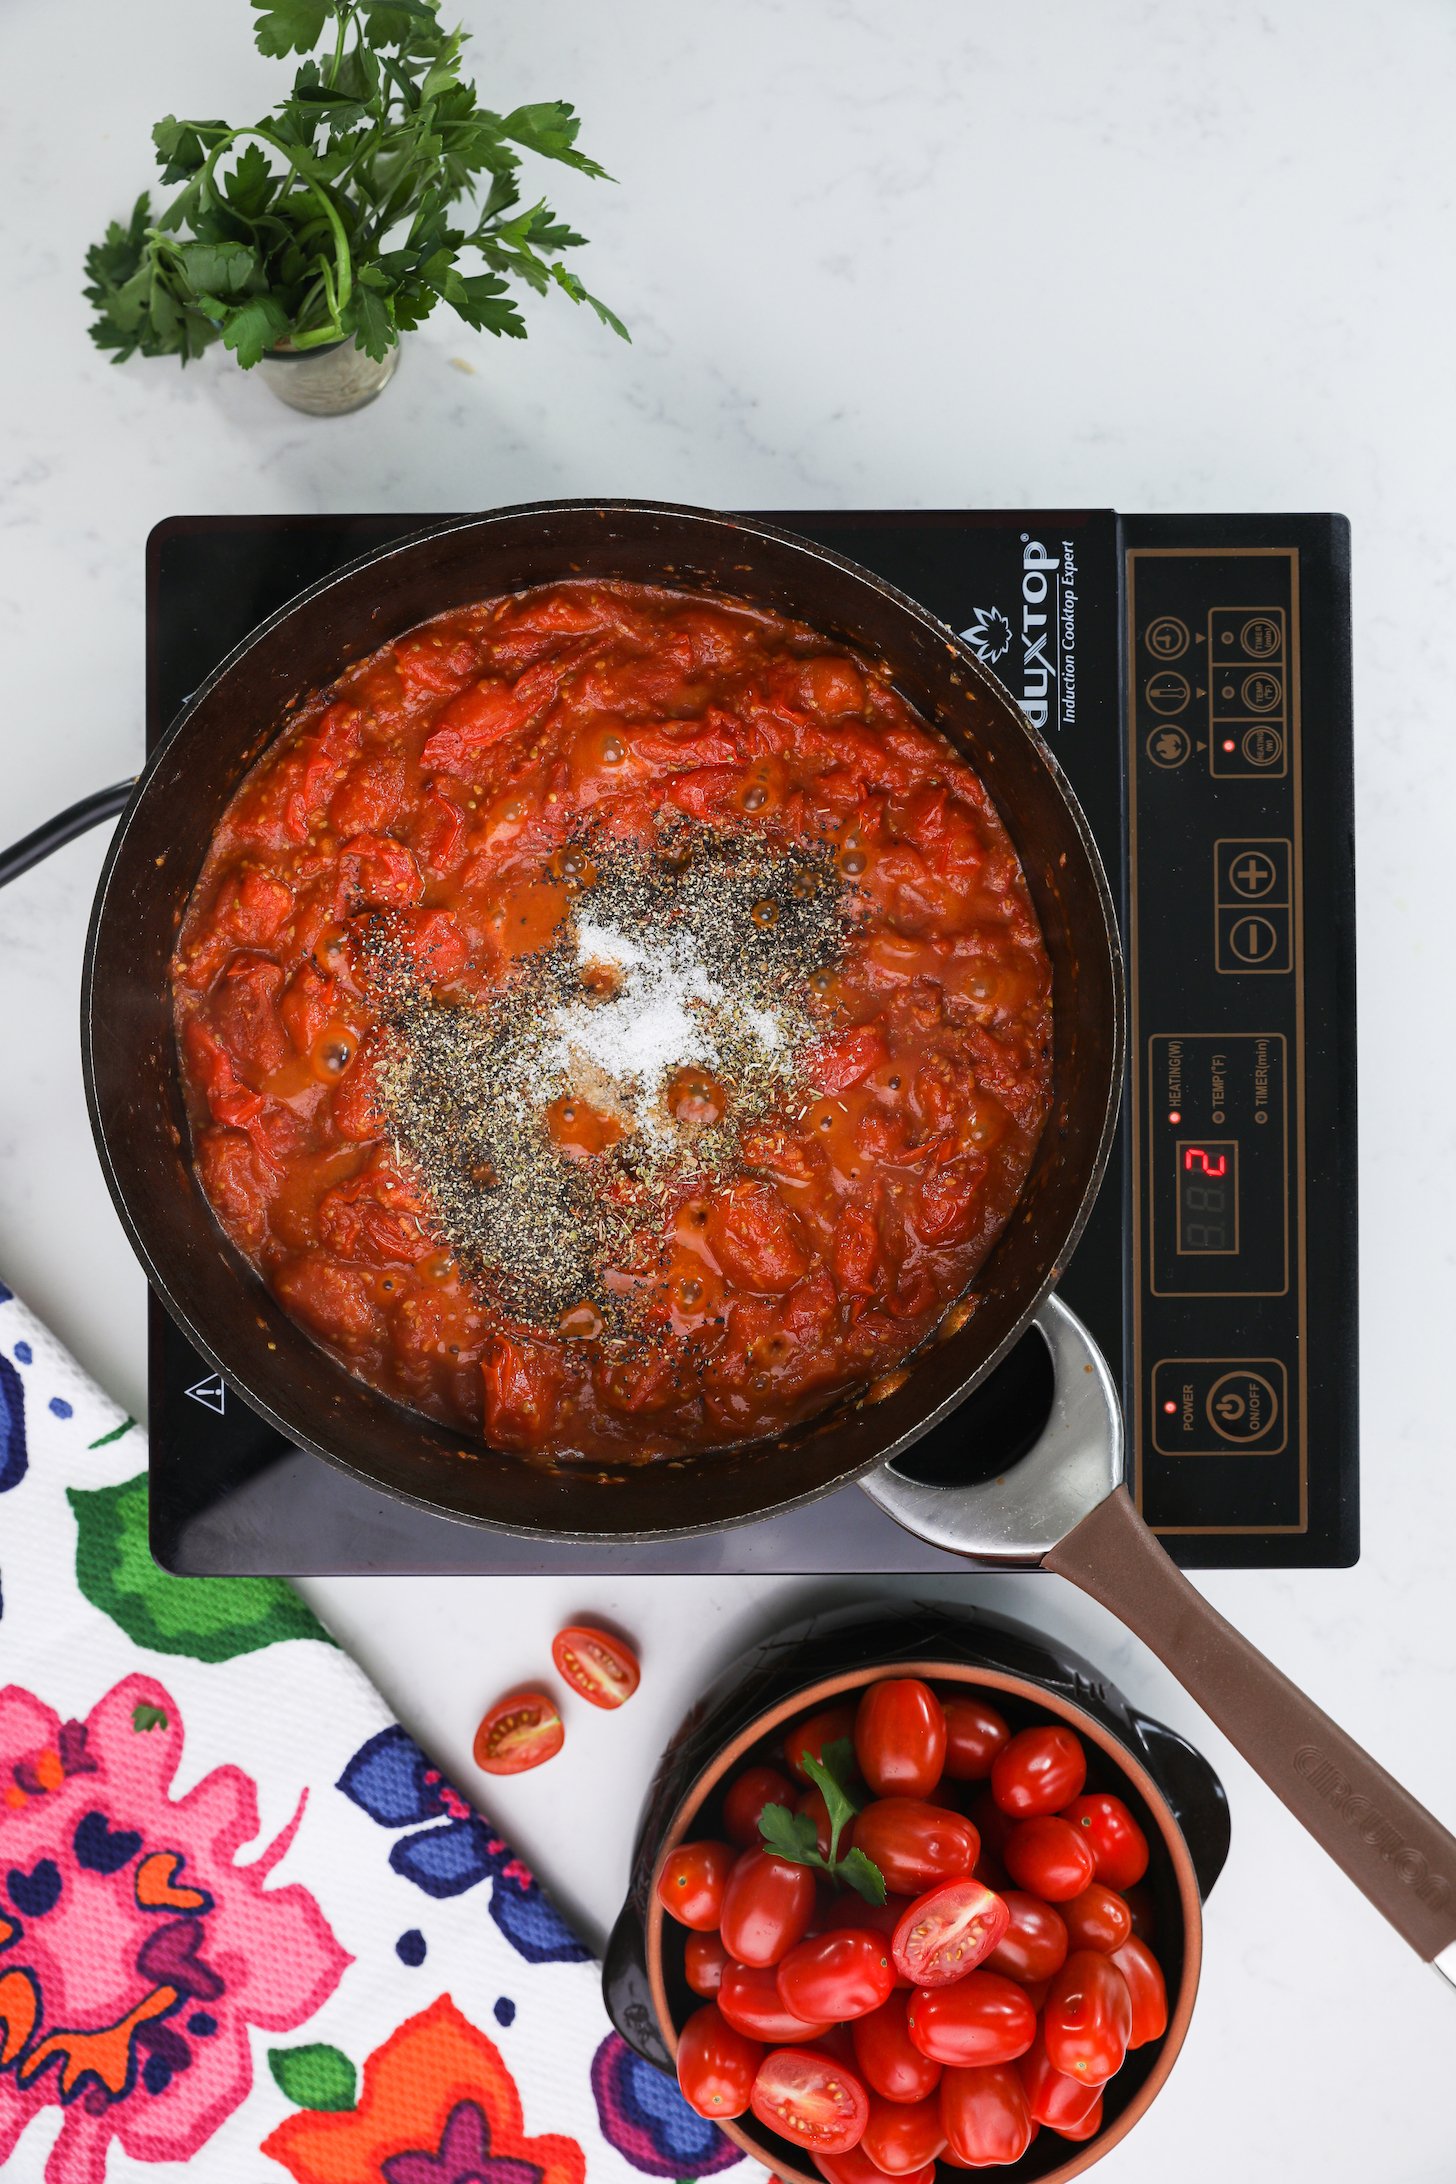 Tomato sauce topped with salt and pepper in a pan on a mobile cooktop, surrounded by herbs and fresh tomatoes.